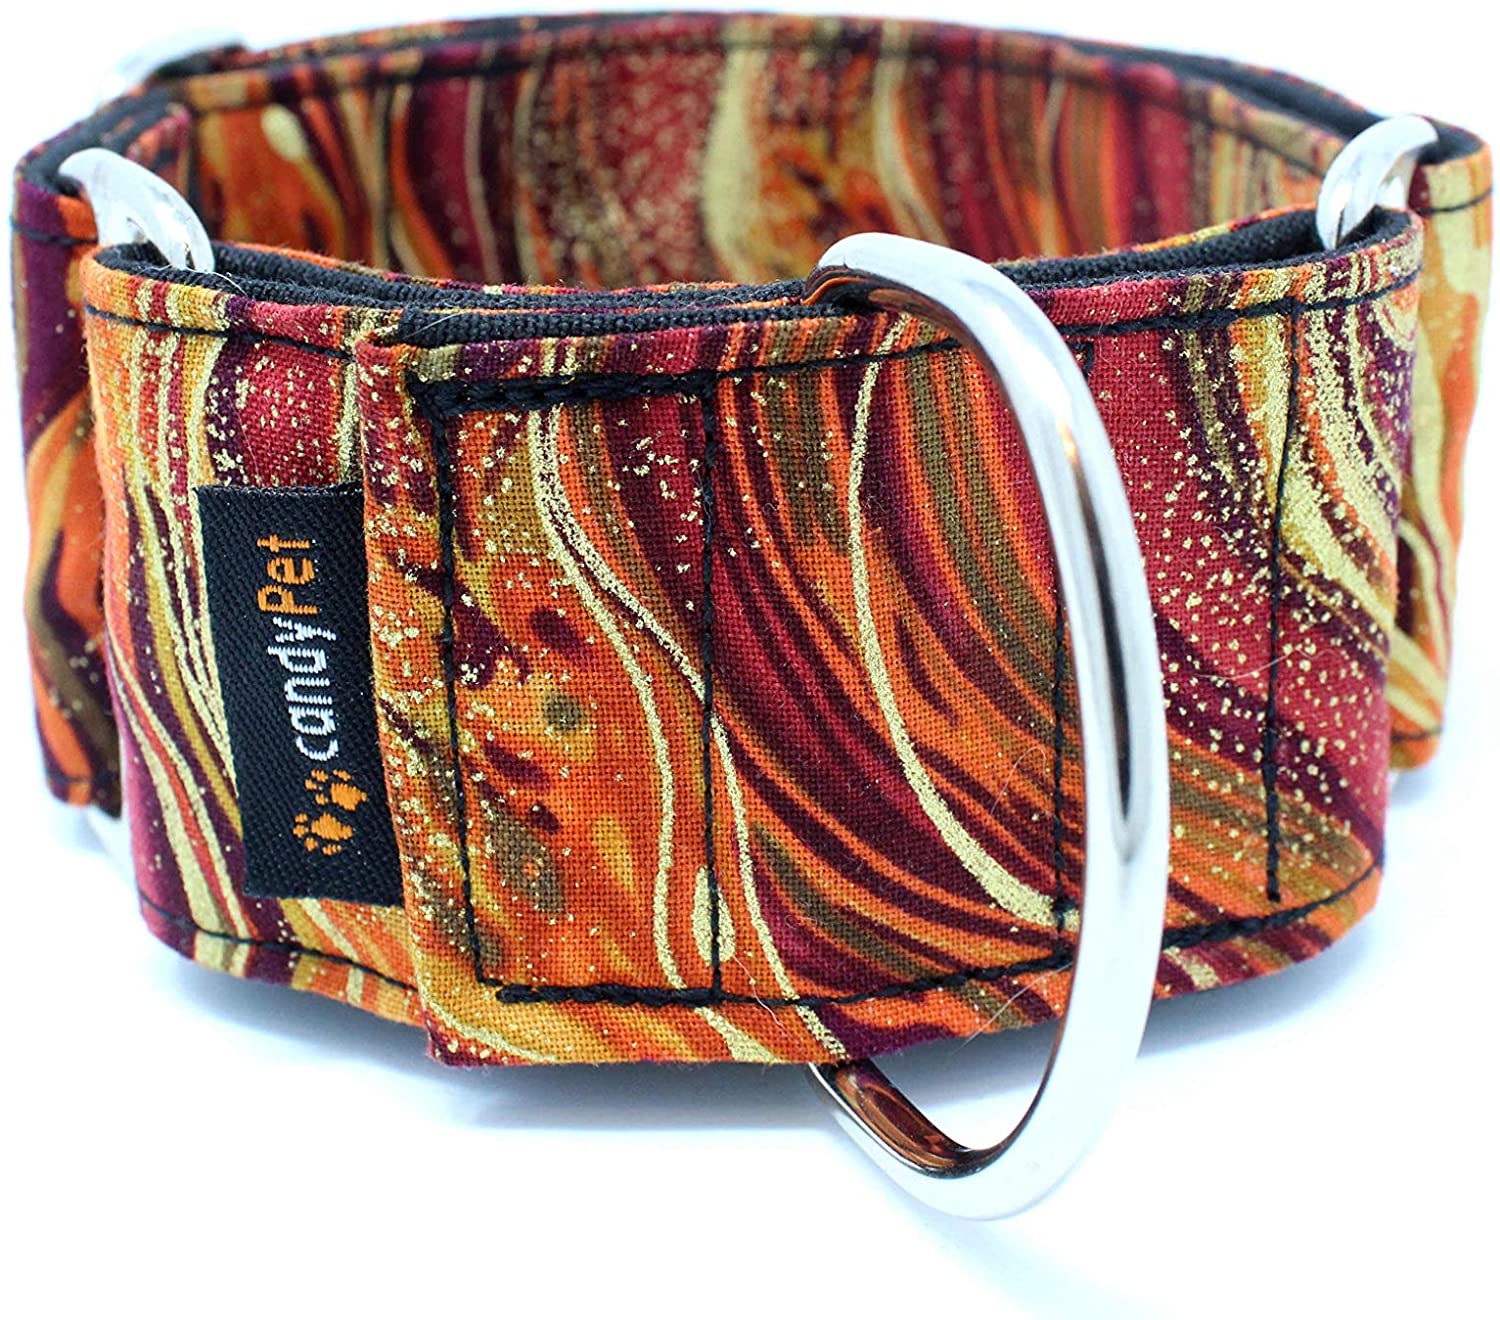  candyPet Collar Martingale Para Perros - Modelo New Waves, S 